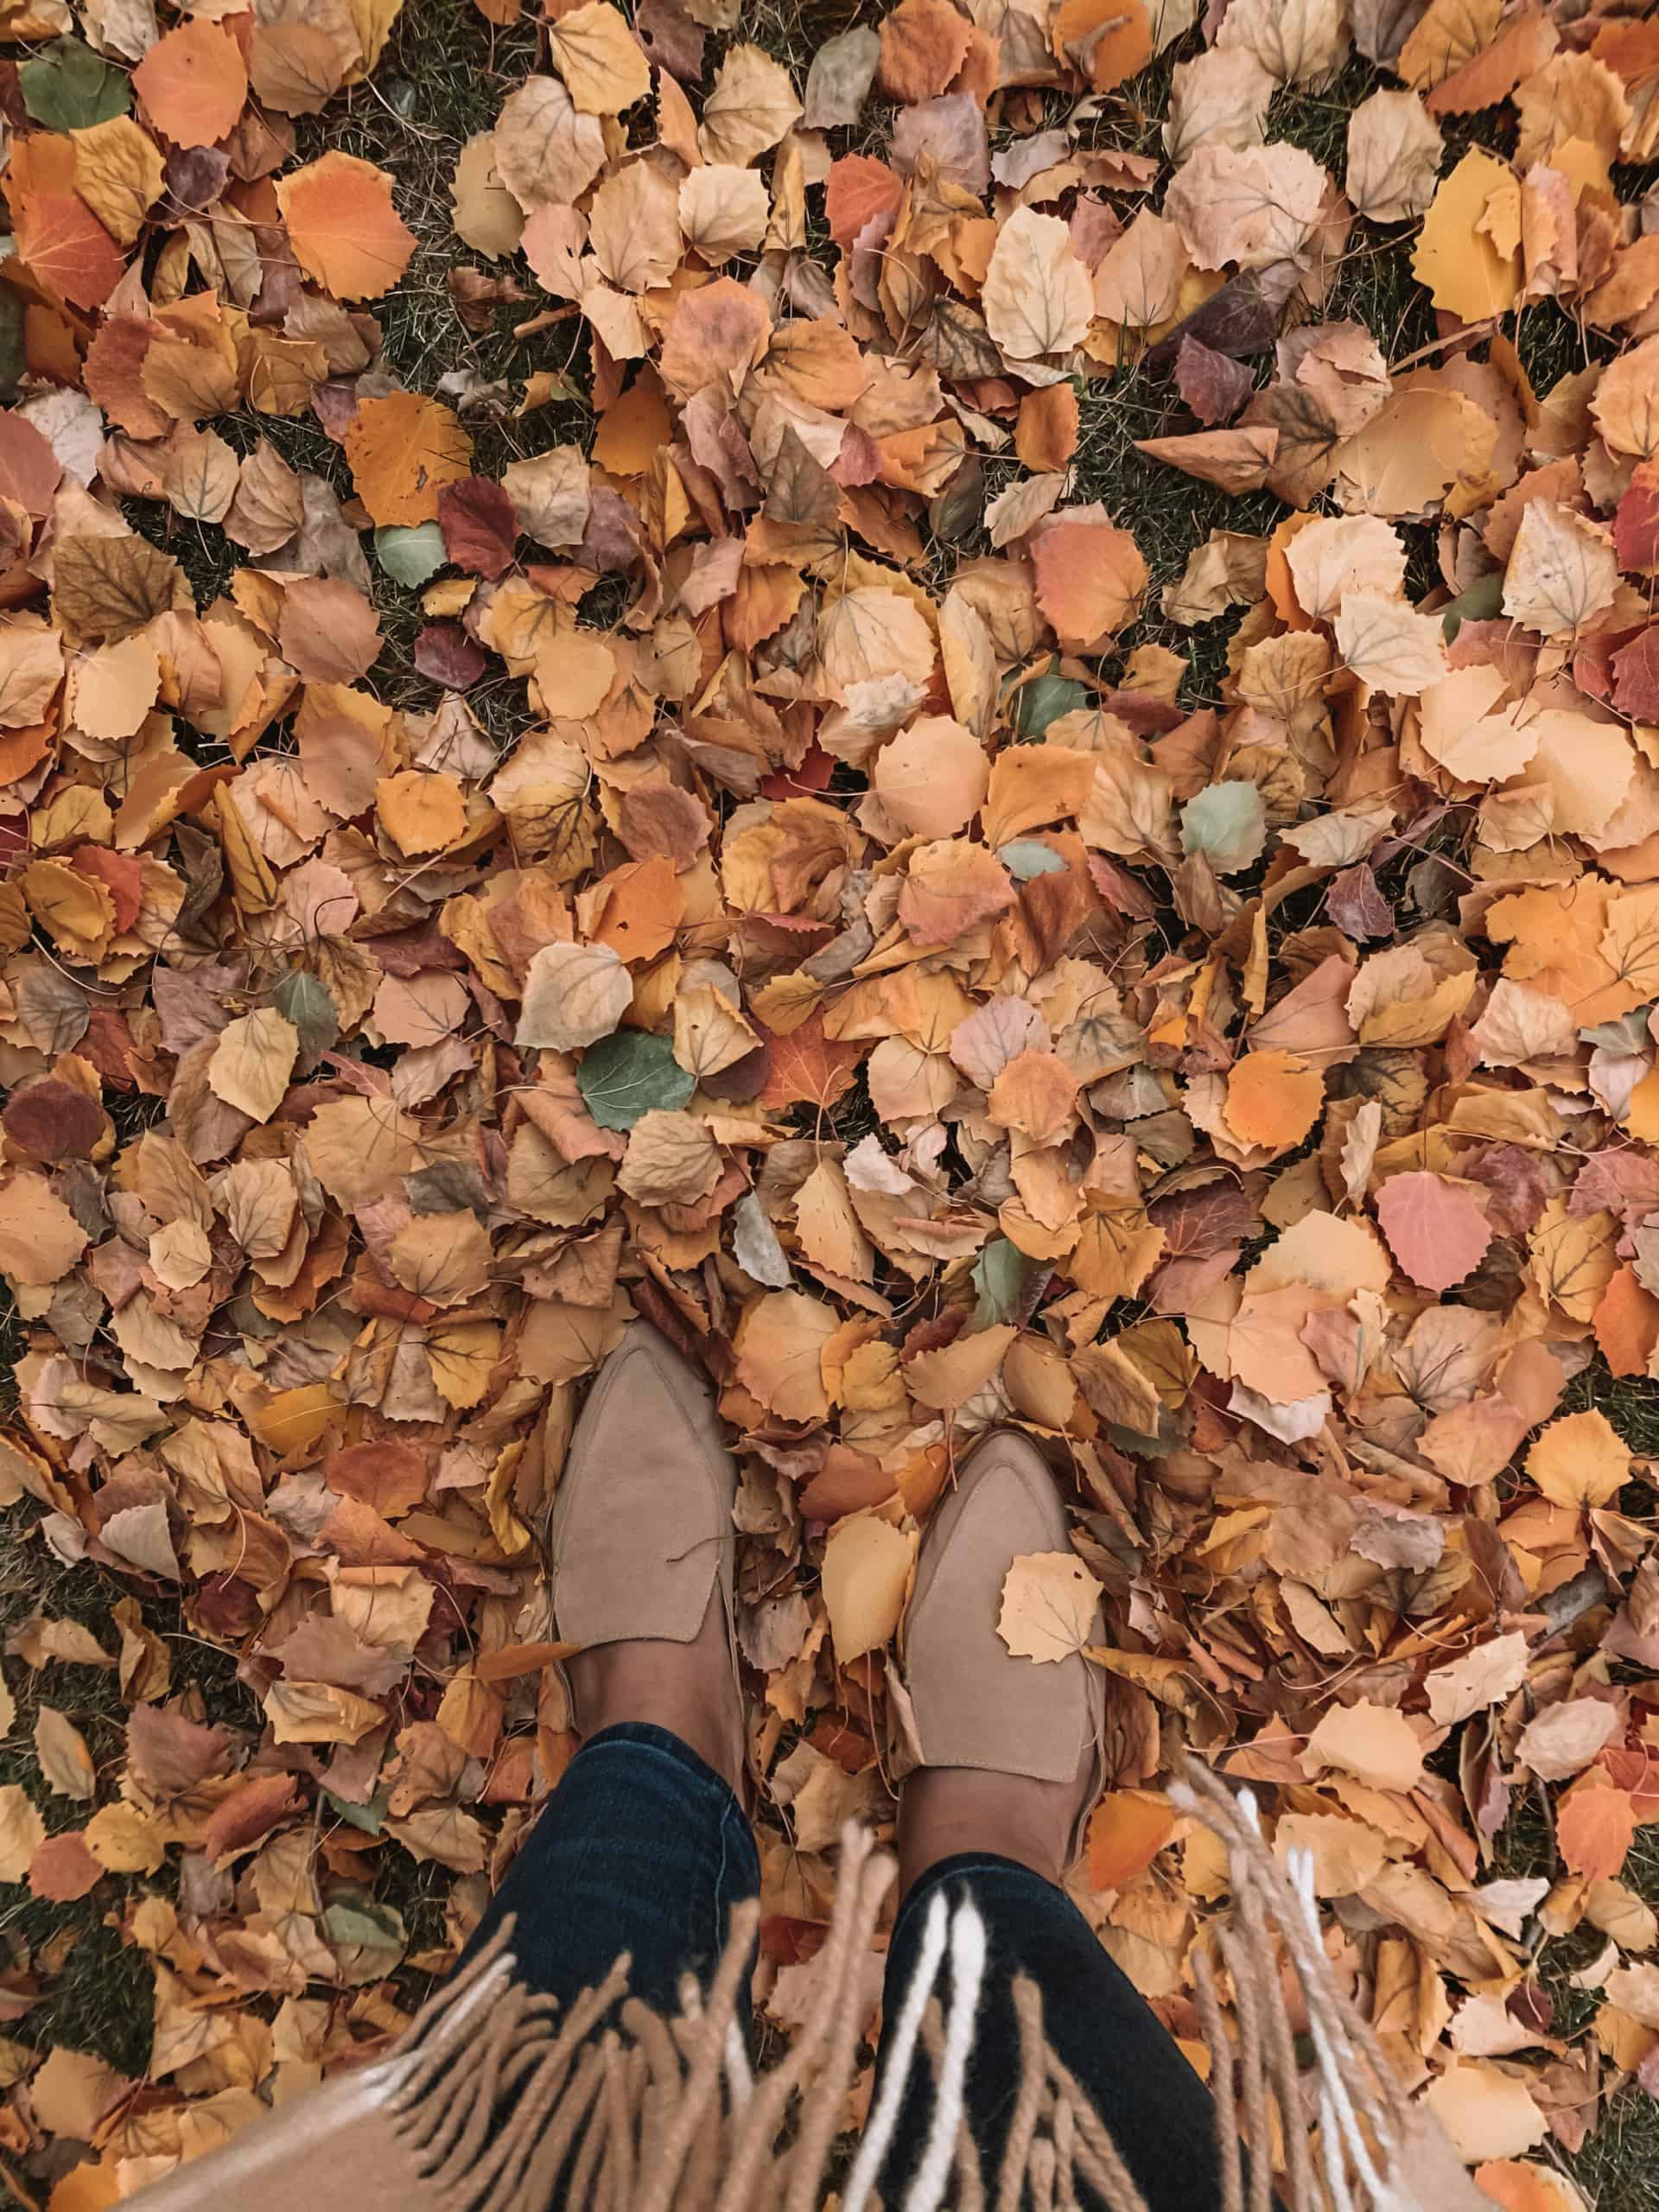 non dexcript woman's feet standing in a pile of fall leaves